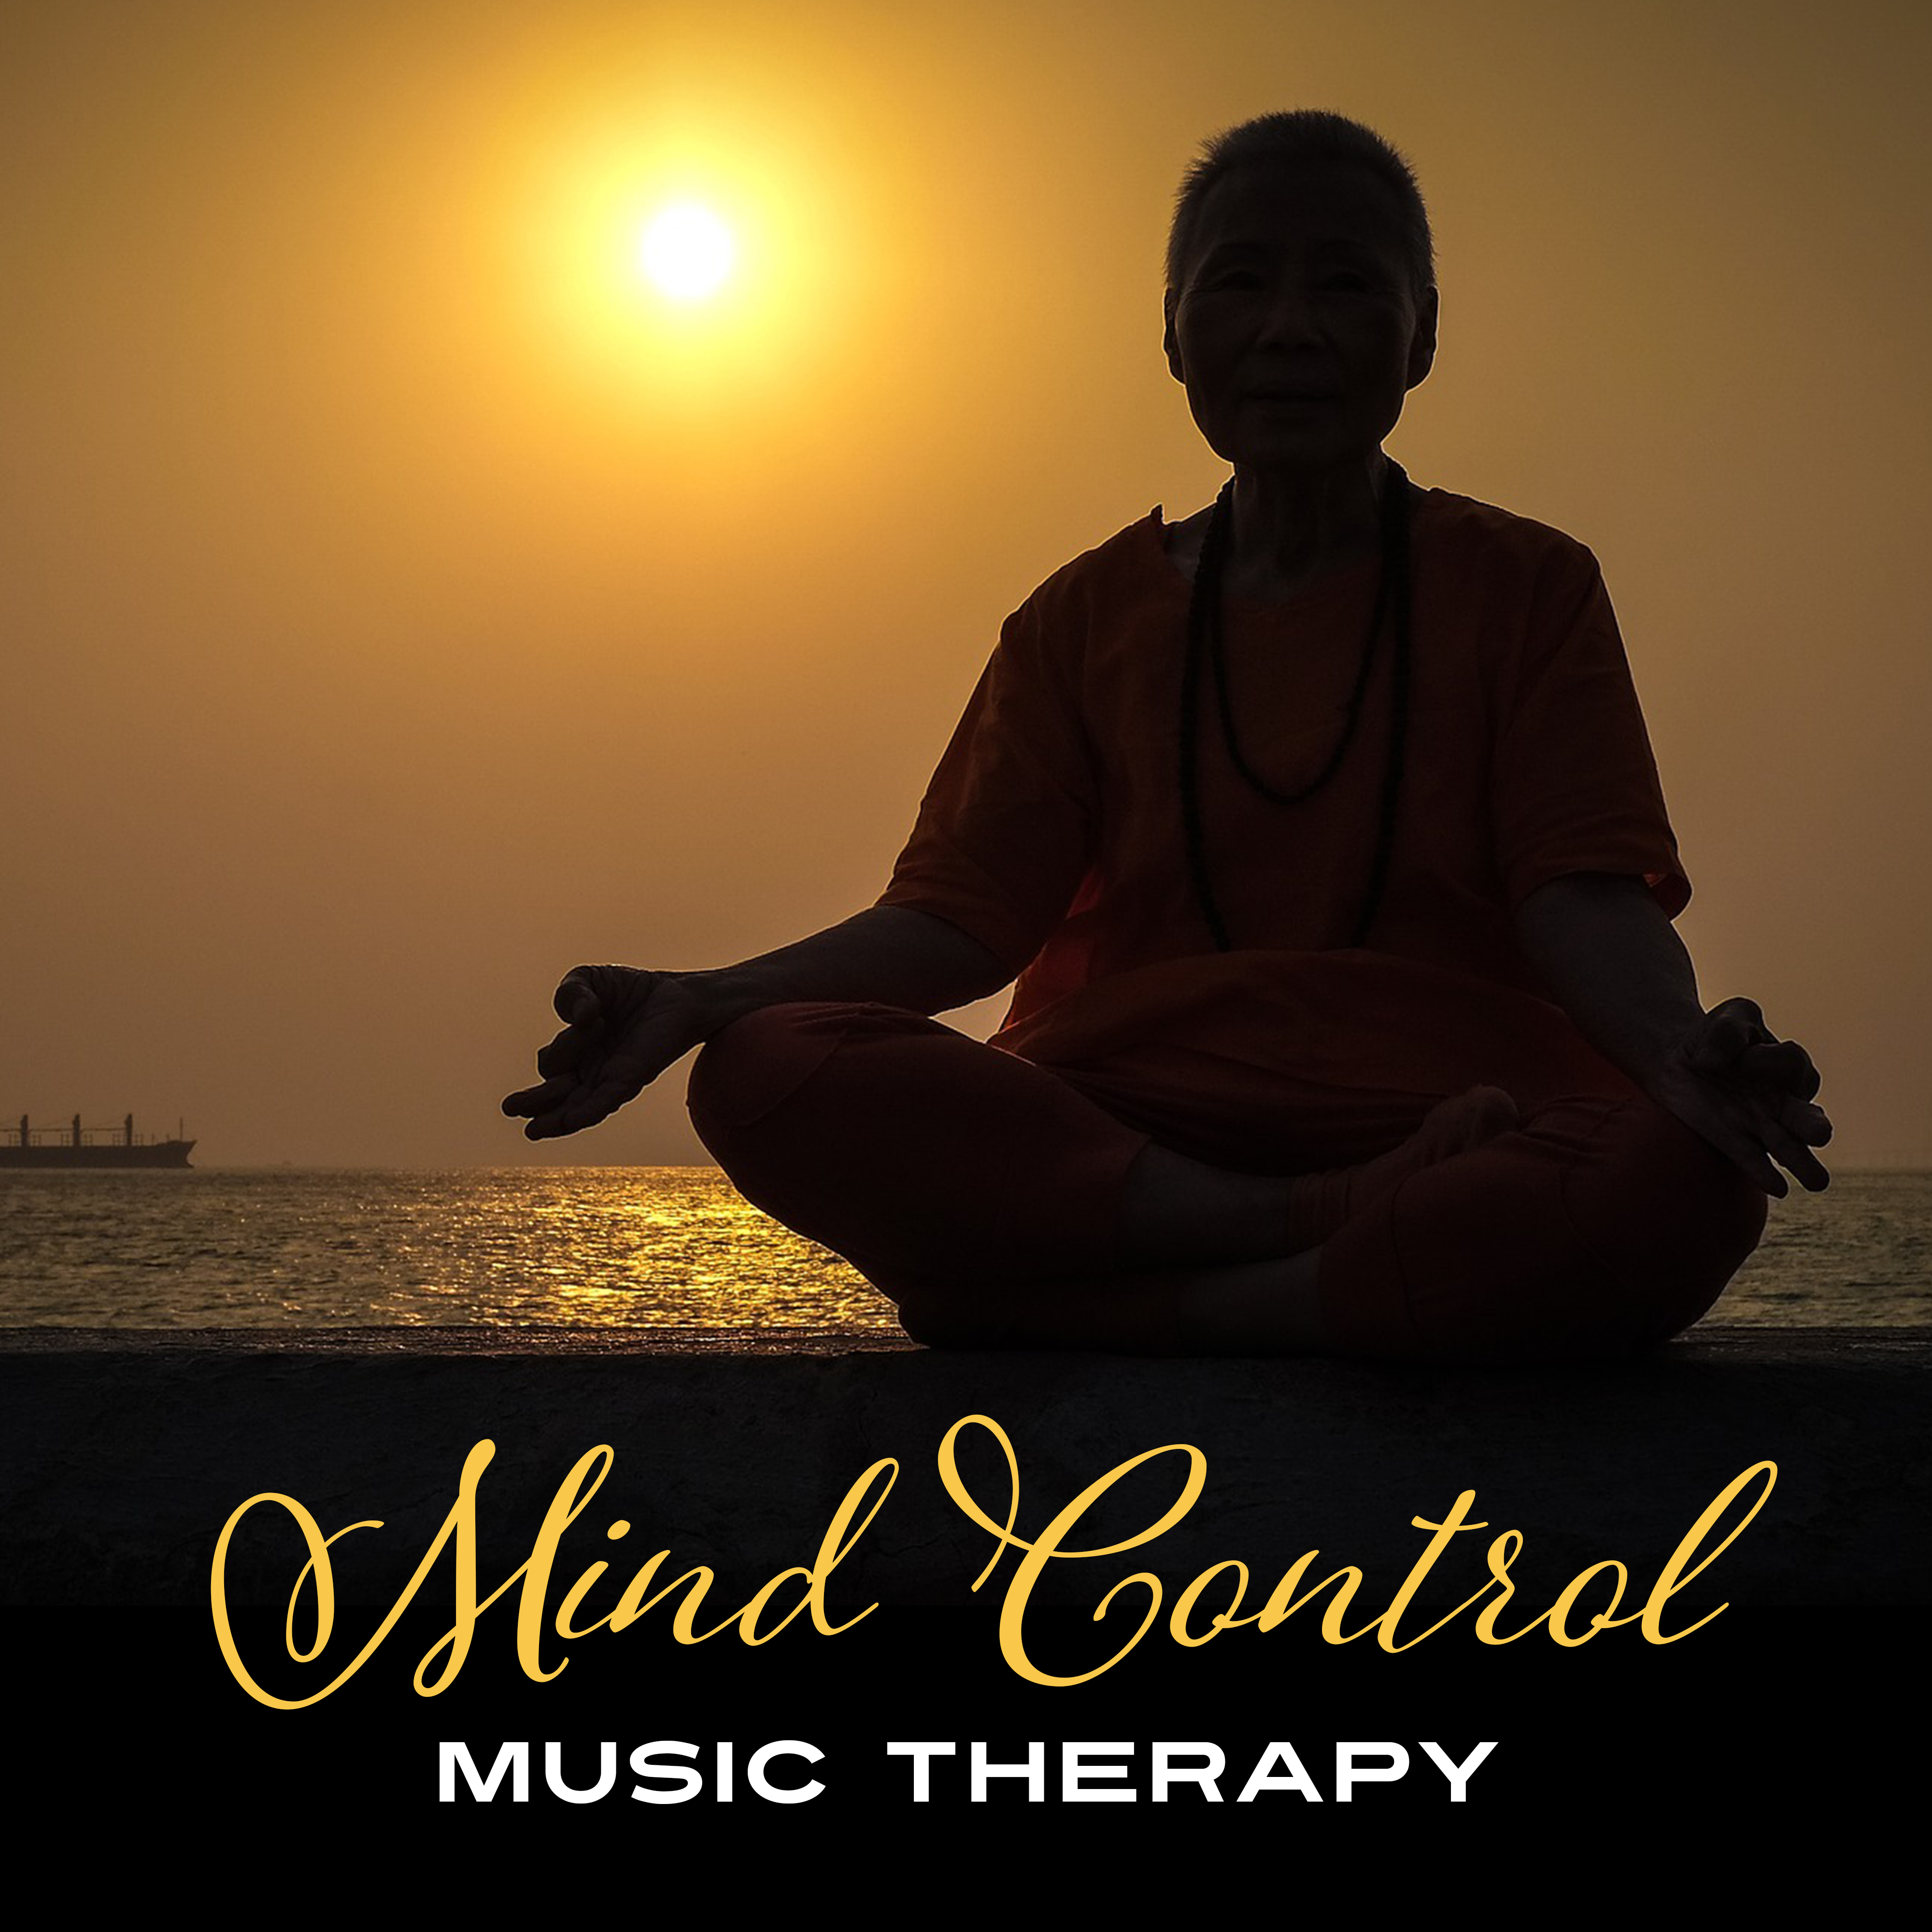 Mind Control Music Therapy  - Full of Nature Sounds, Mindfulness Therapy Music, Yoga Background, Be Mindful